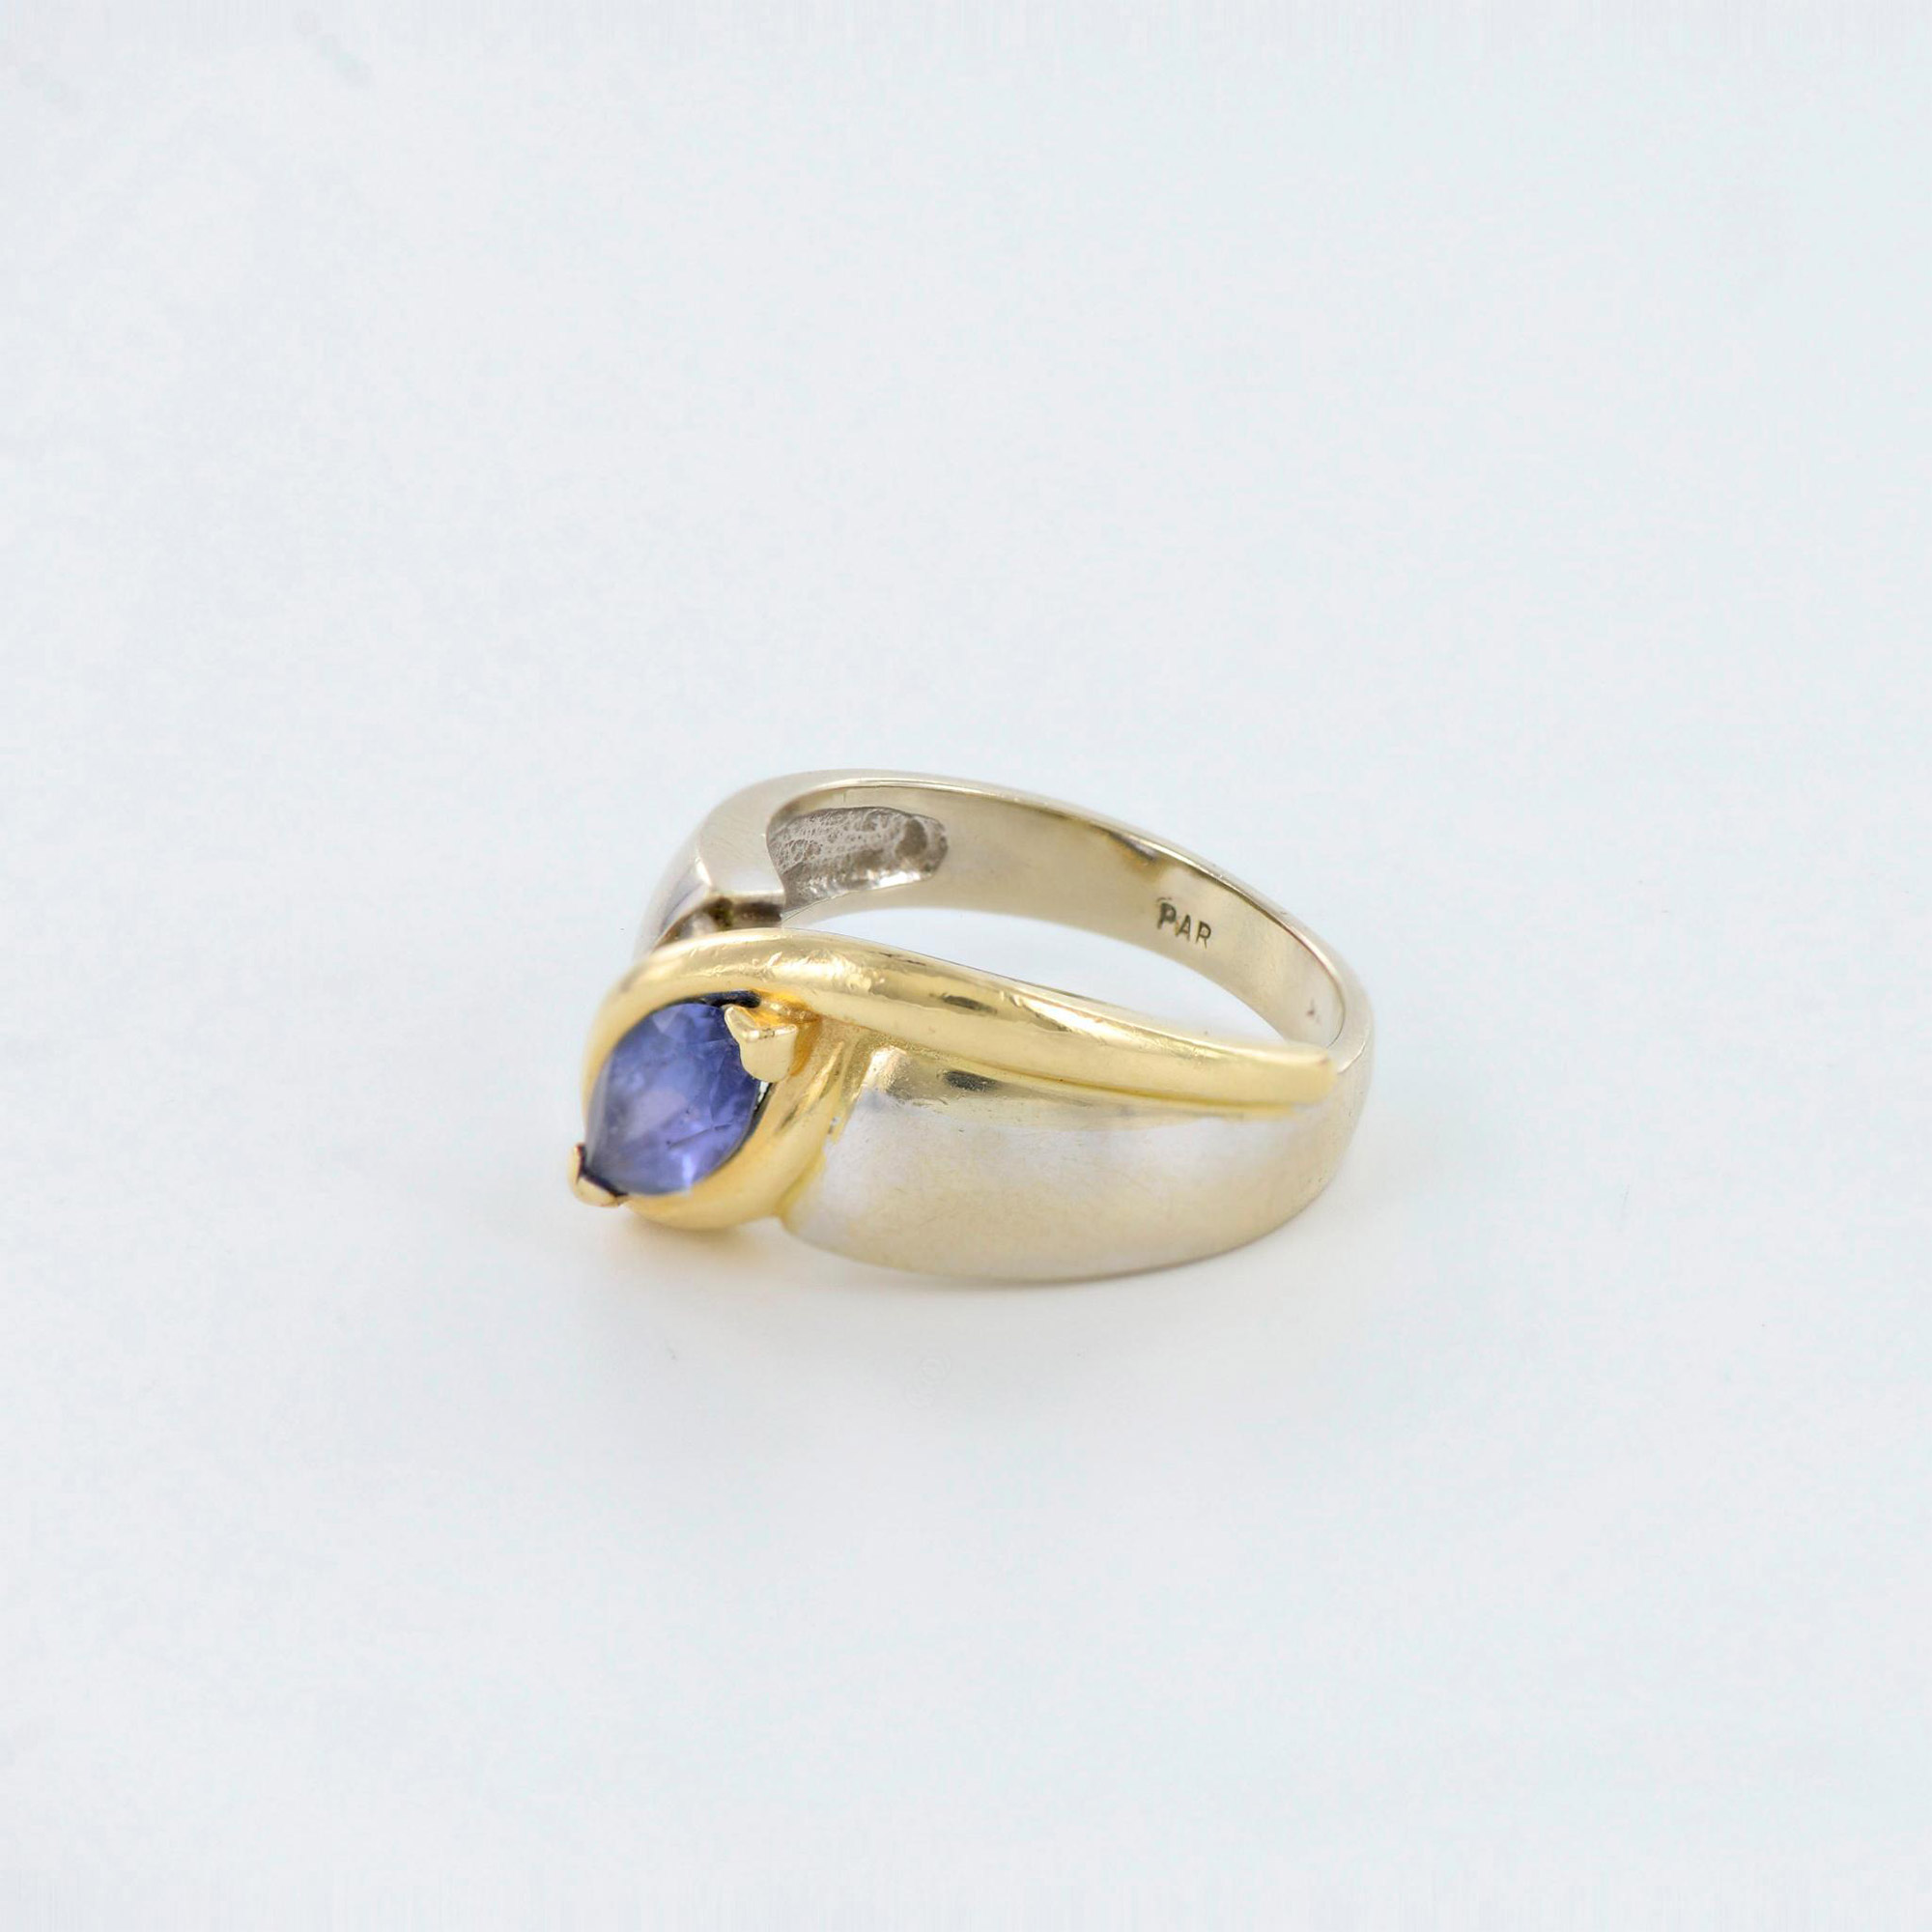 Pretty 4K Yellow and White Gold with Tanzanite and Diamond Ring - Image 2 of 5